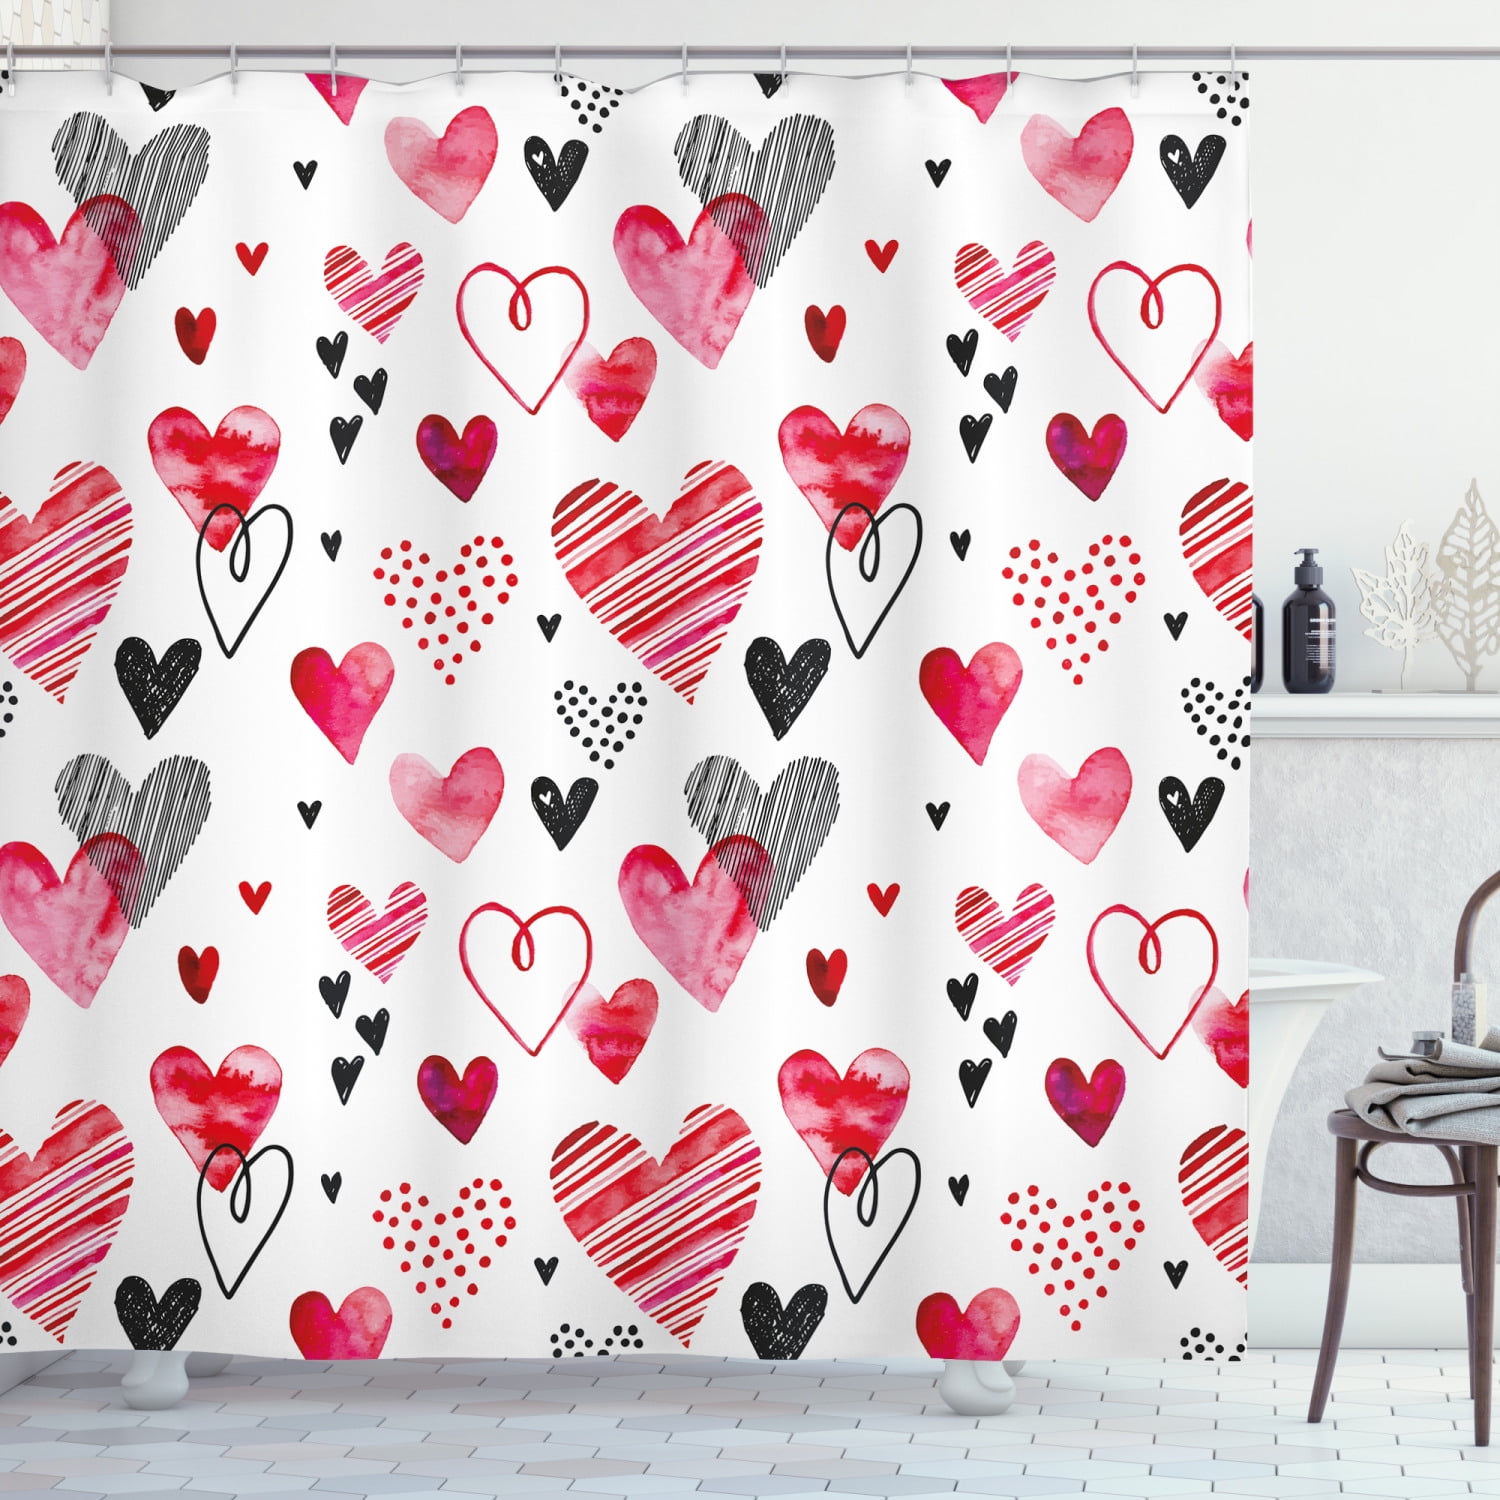 Happy Valentines's Day On Rainbow Wooden Bathroom Fabric Shower Curtain Set 71In 